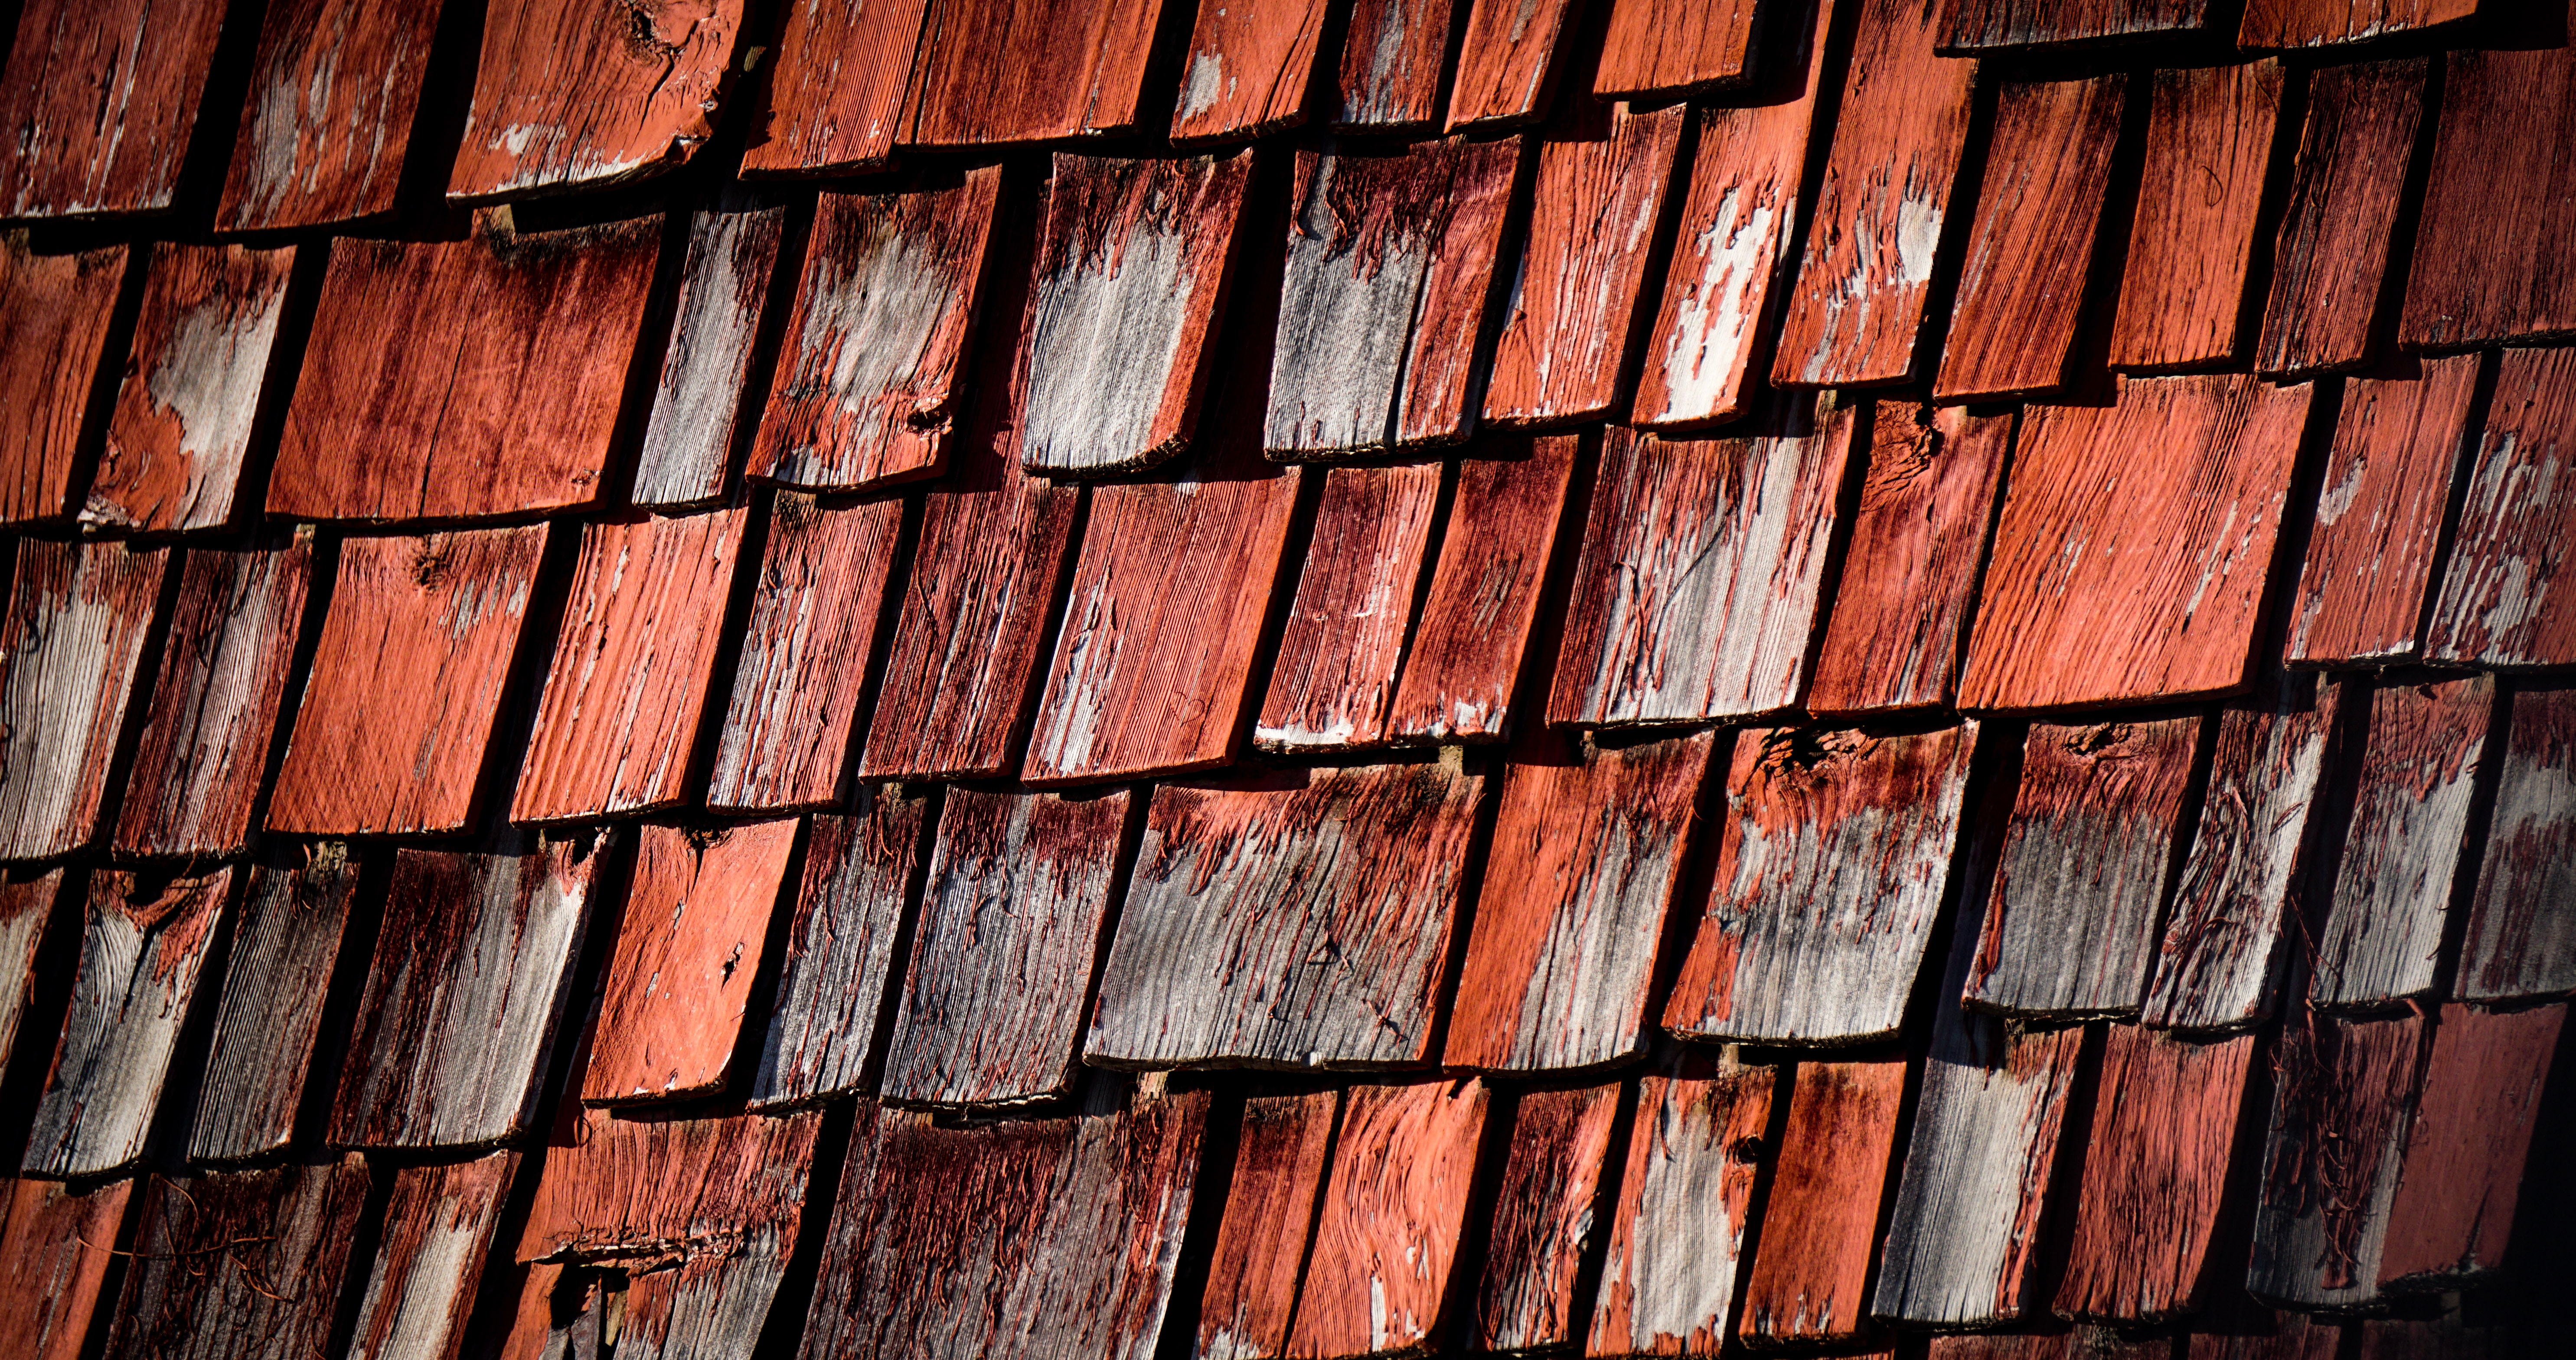 roofing tiles showing damages, in need of repair and maintenance